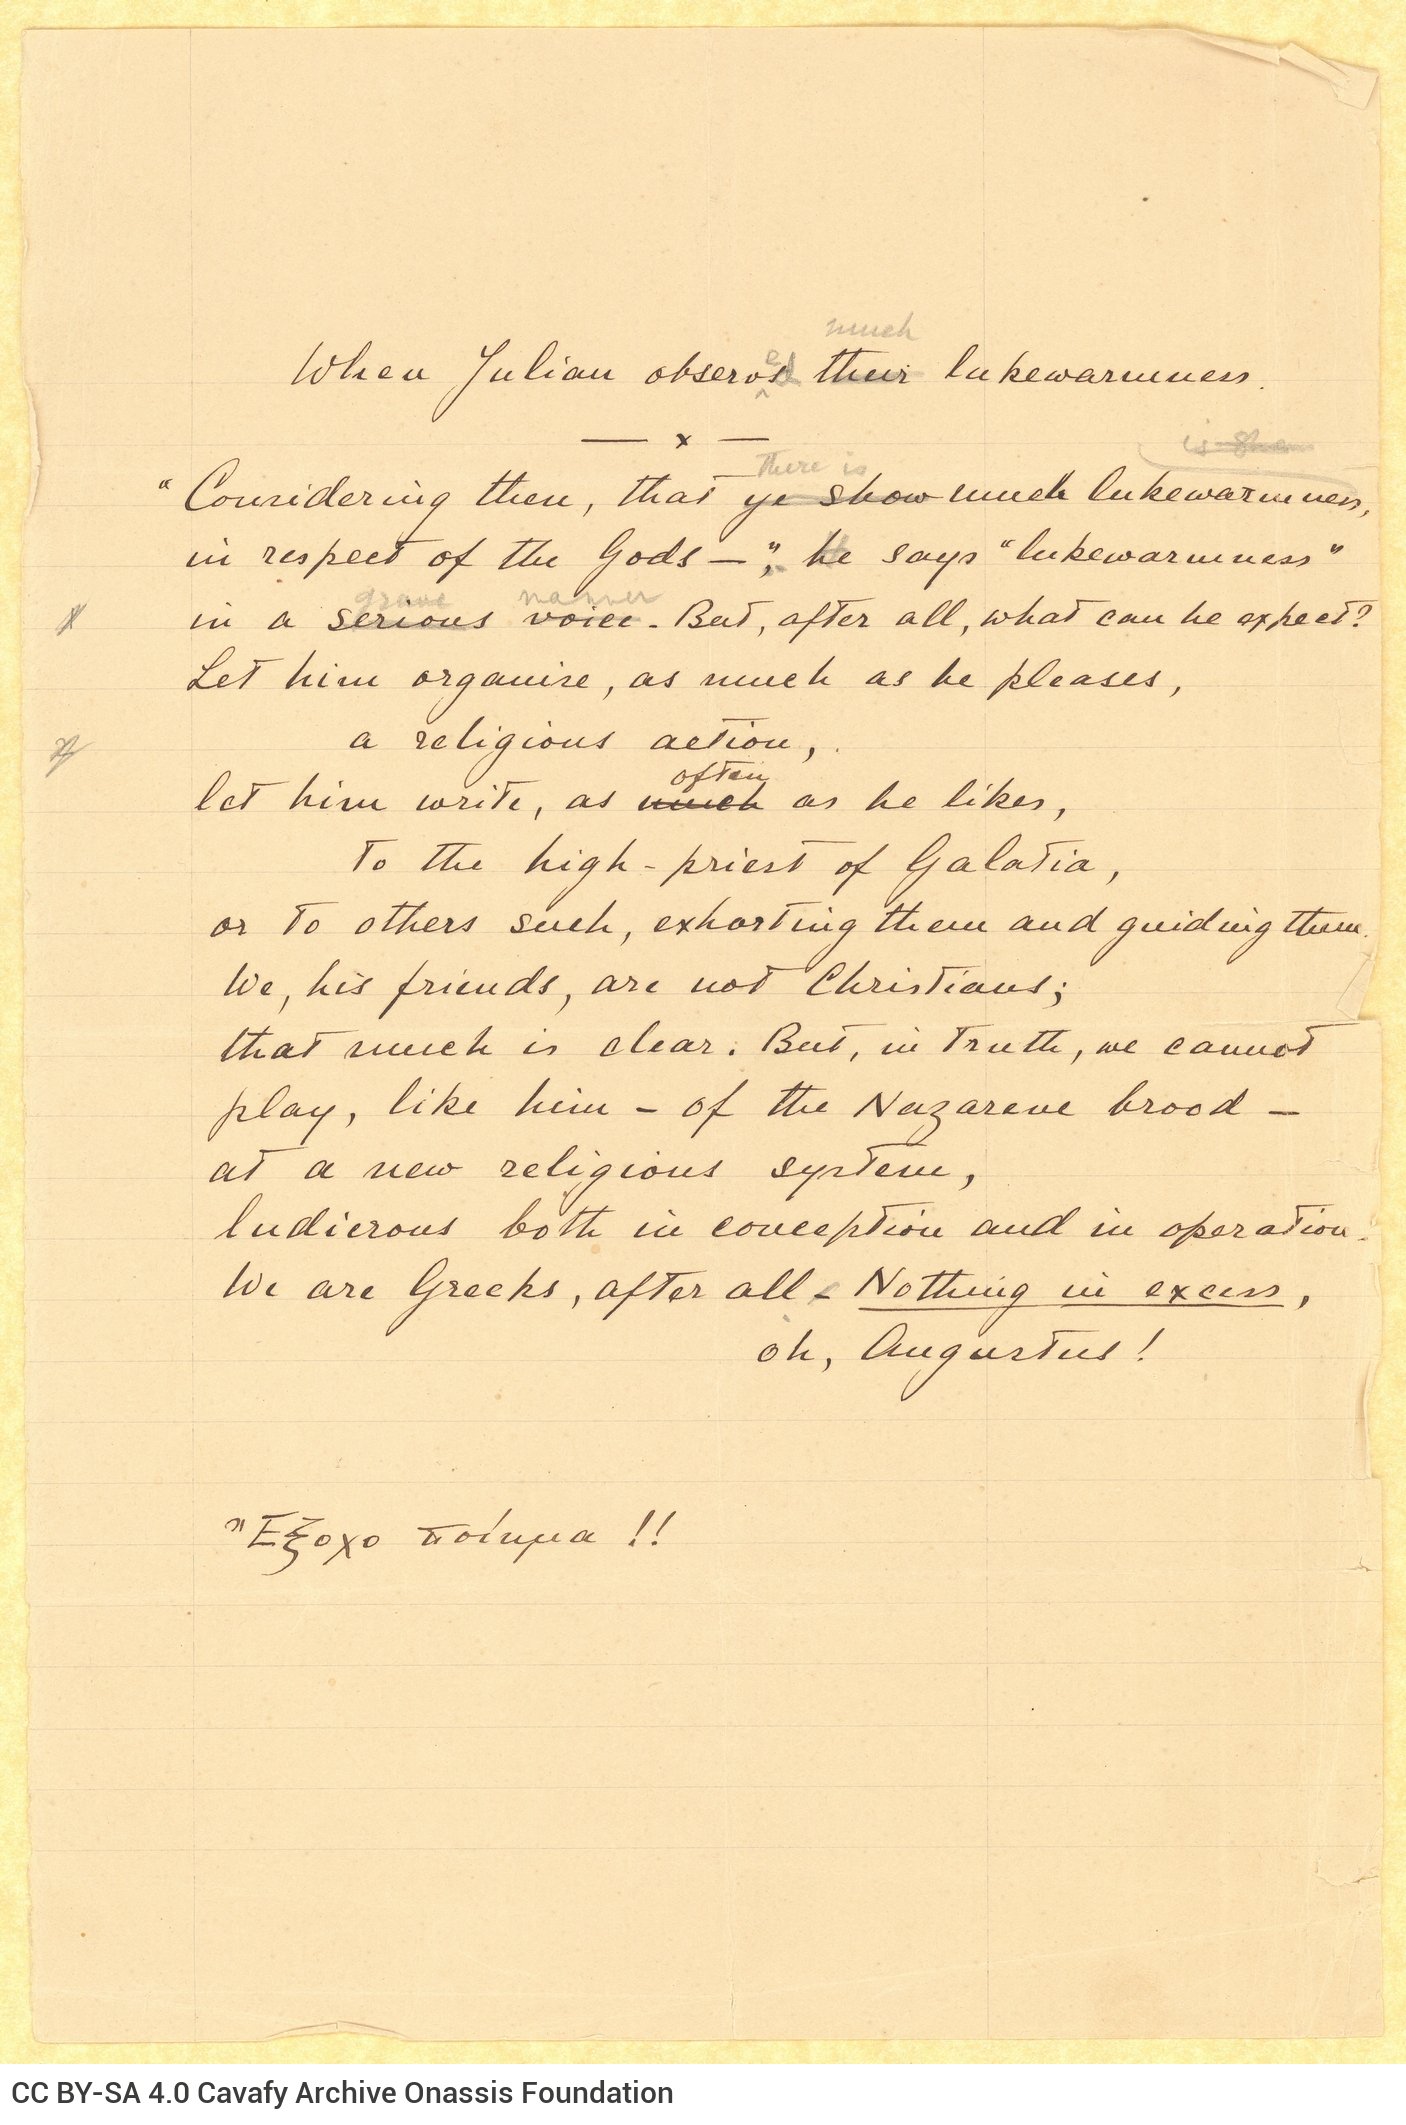 Handwritten English translation of the poem "When Julian observed much lukewarmness" on one side of a ruled sheet. The poe